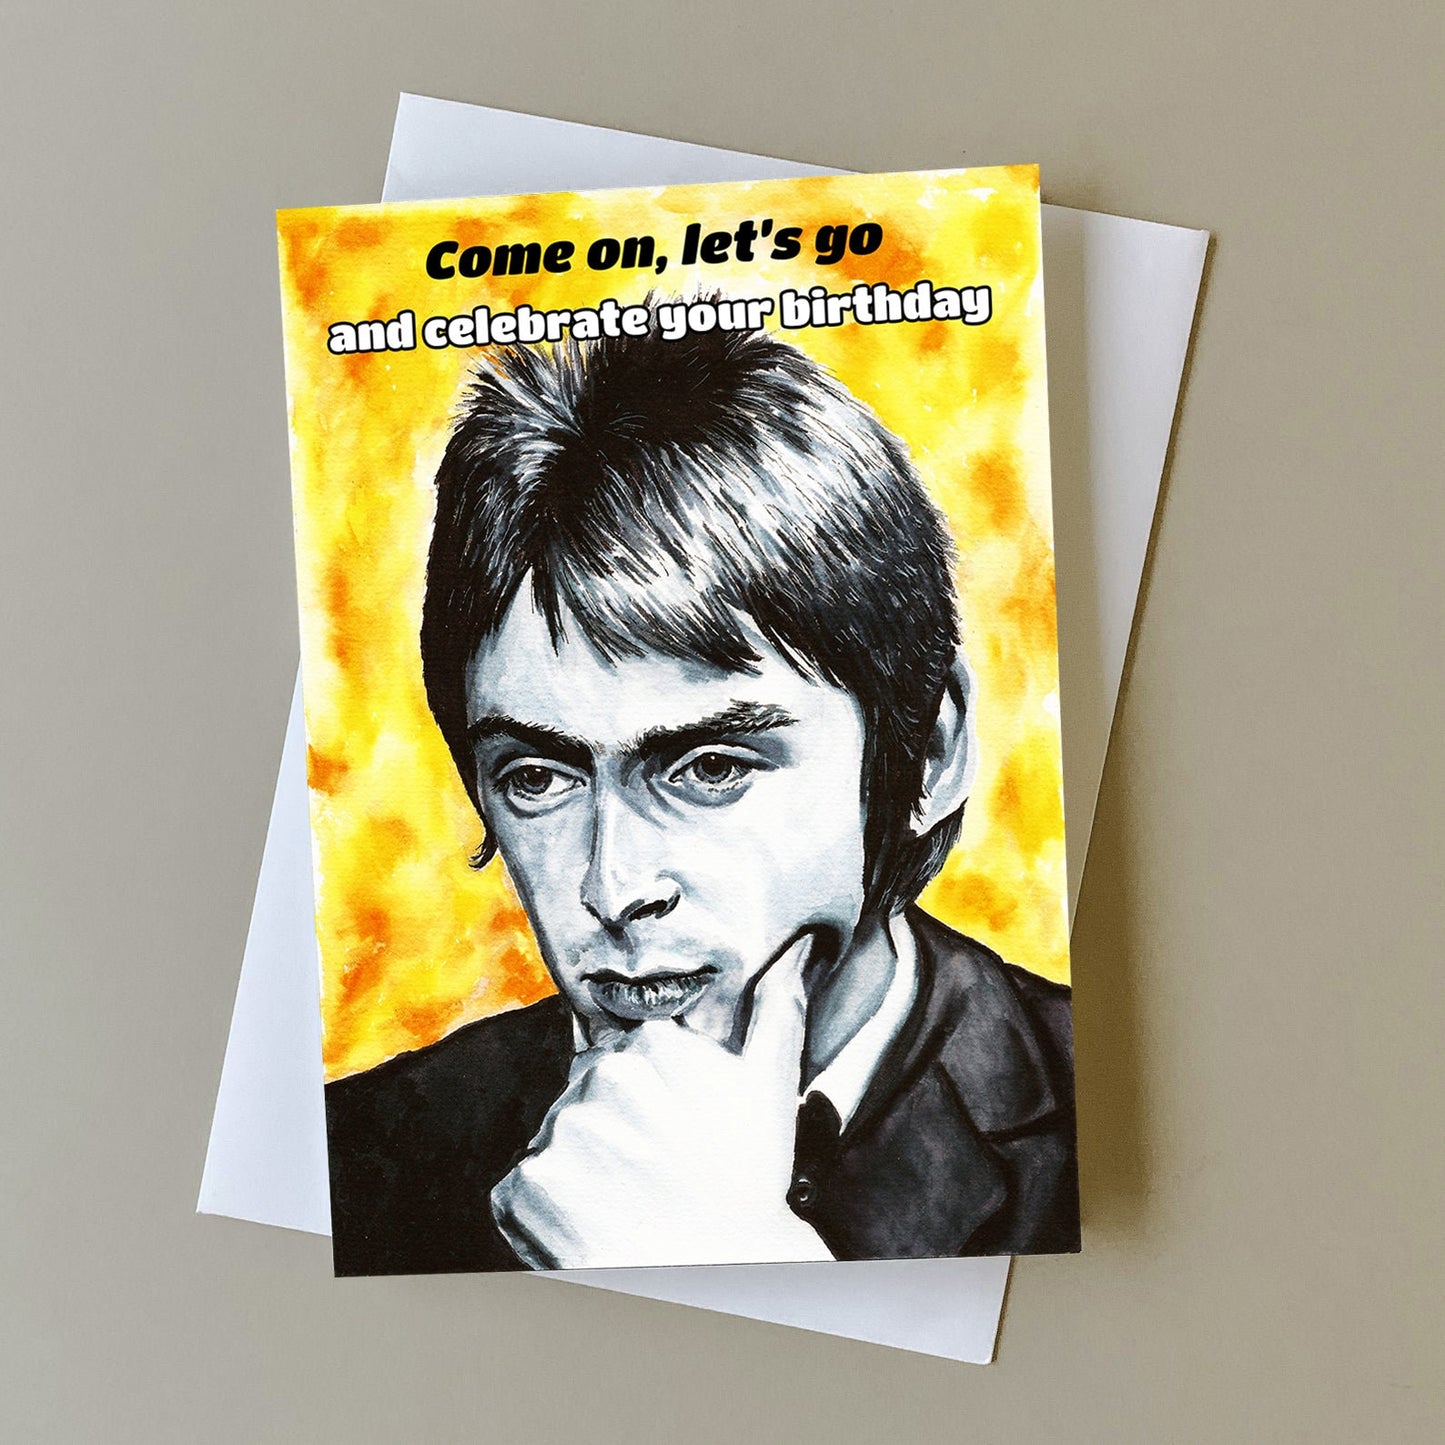 Paul Weller birthday card, Come on Let's Go, greeting card for mod music fans, mod punk music birthday gift, The Jam card, Style Council